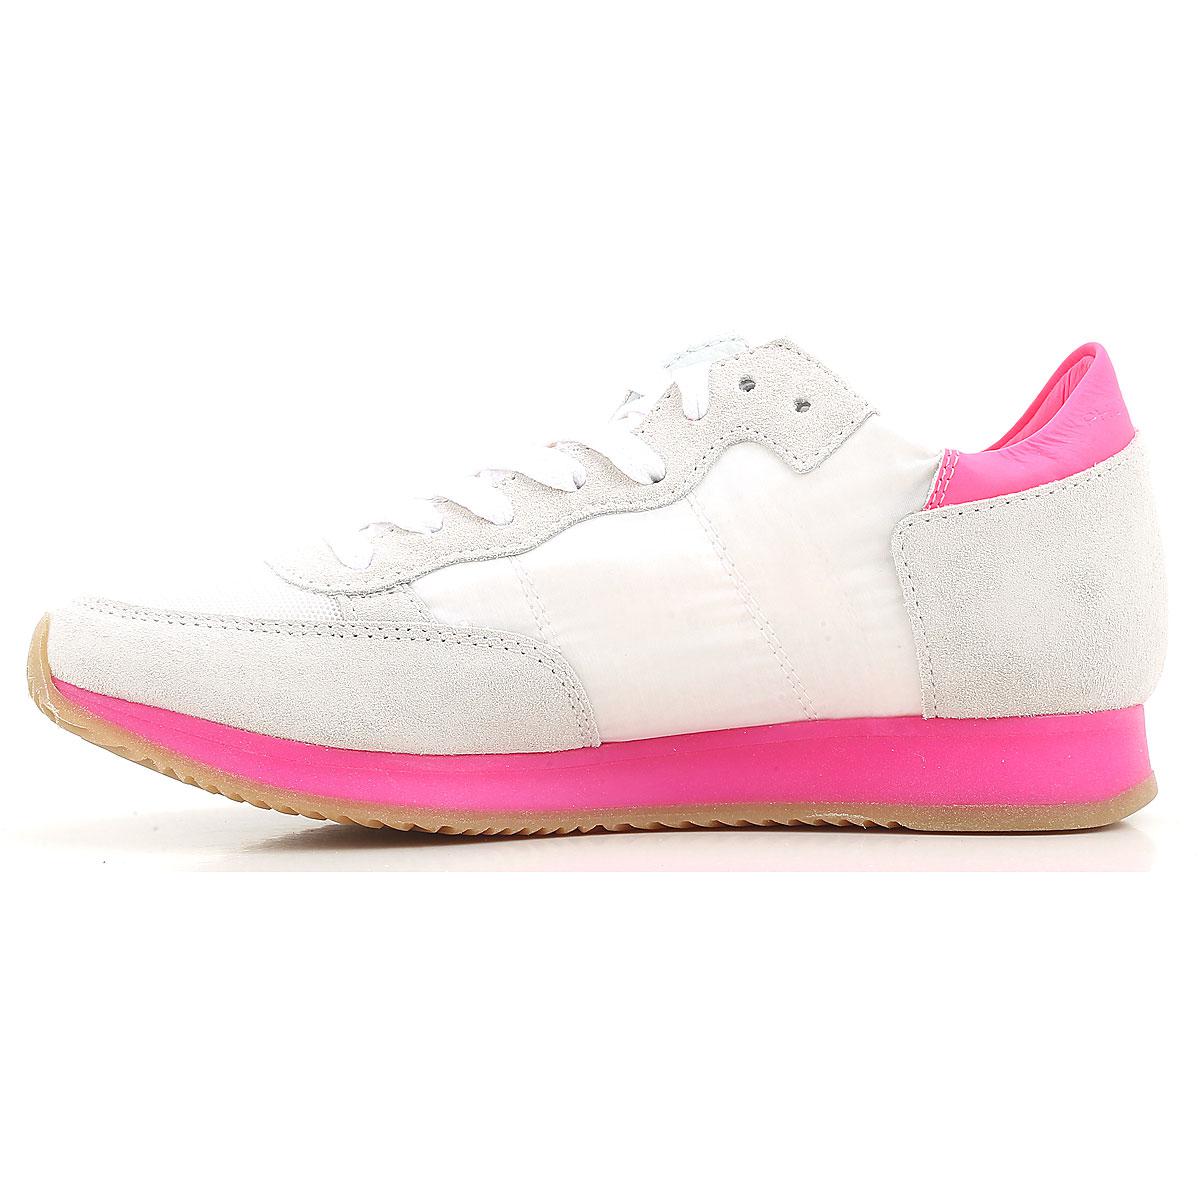 Philippe Model Sneakers For Women On Sale in White - Lyst